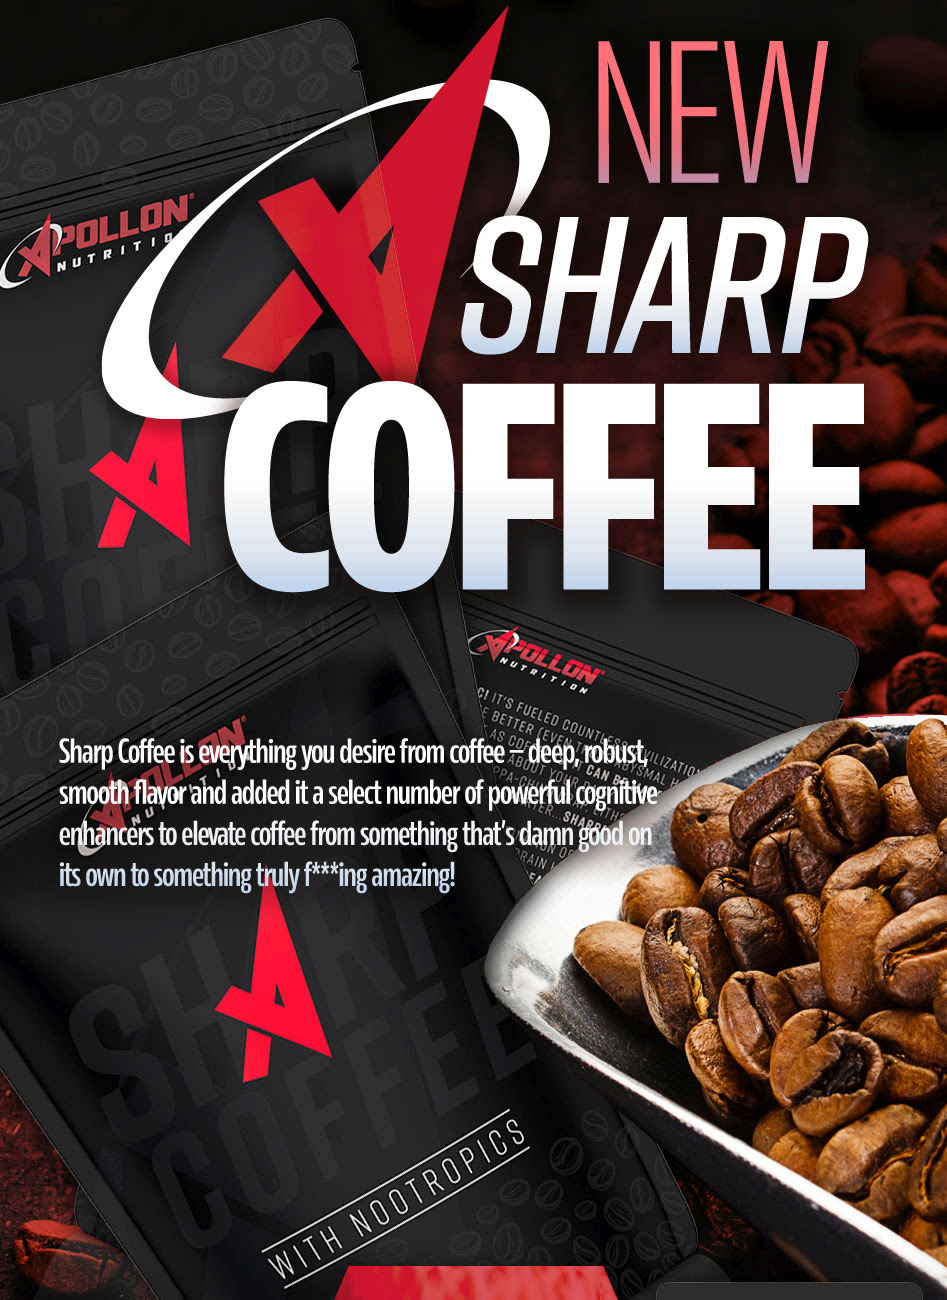 Sharp Coffee Nutrition brand ad highlighting its robust flavor and cognitive enhancements, with an emphasis on nootropics use.